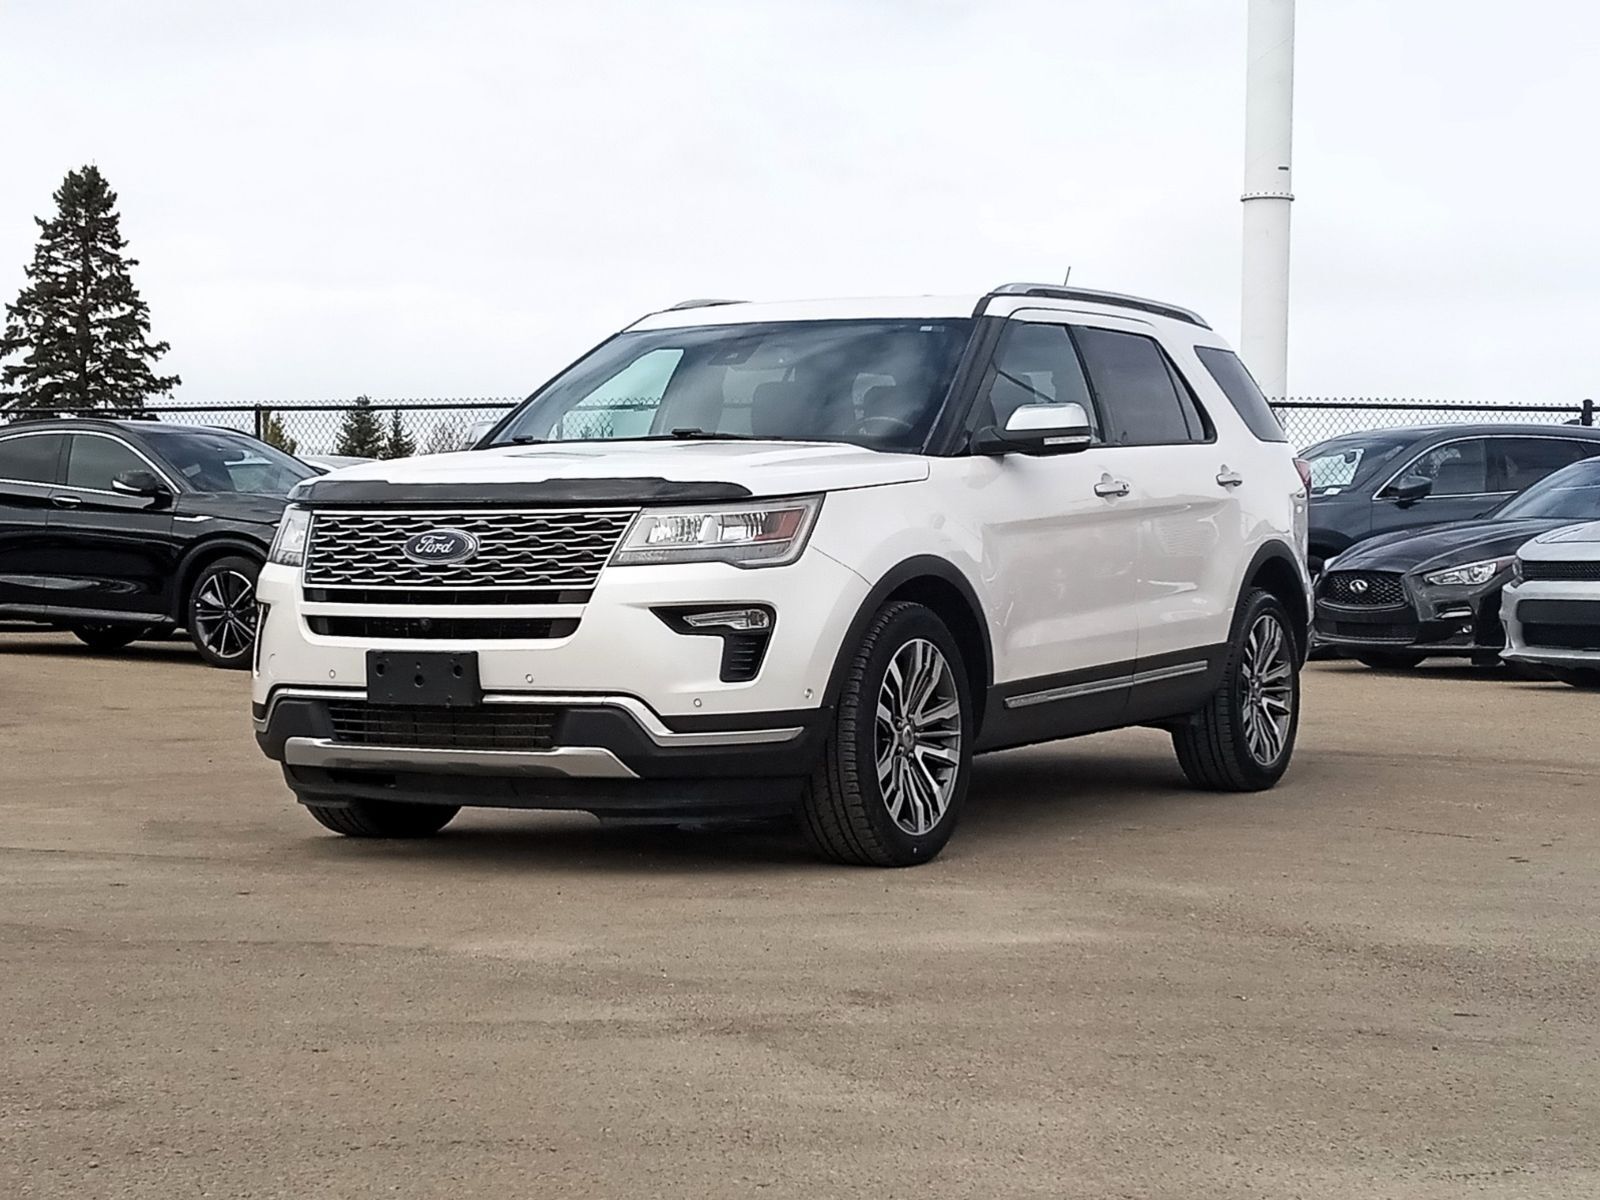 2018 Ford Explorer Platinum, AWD, LEATHER, SUNROOF, COOLED SEATS